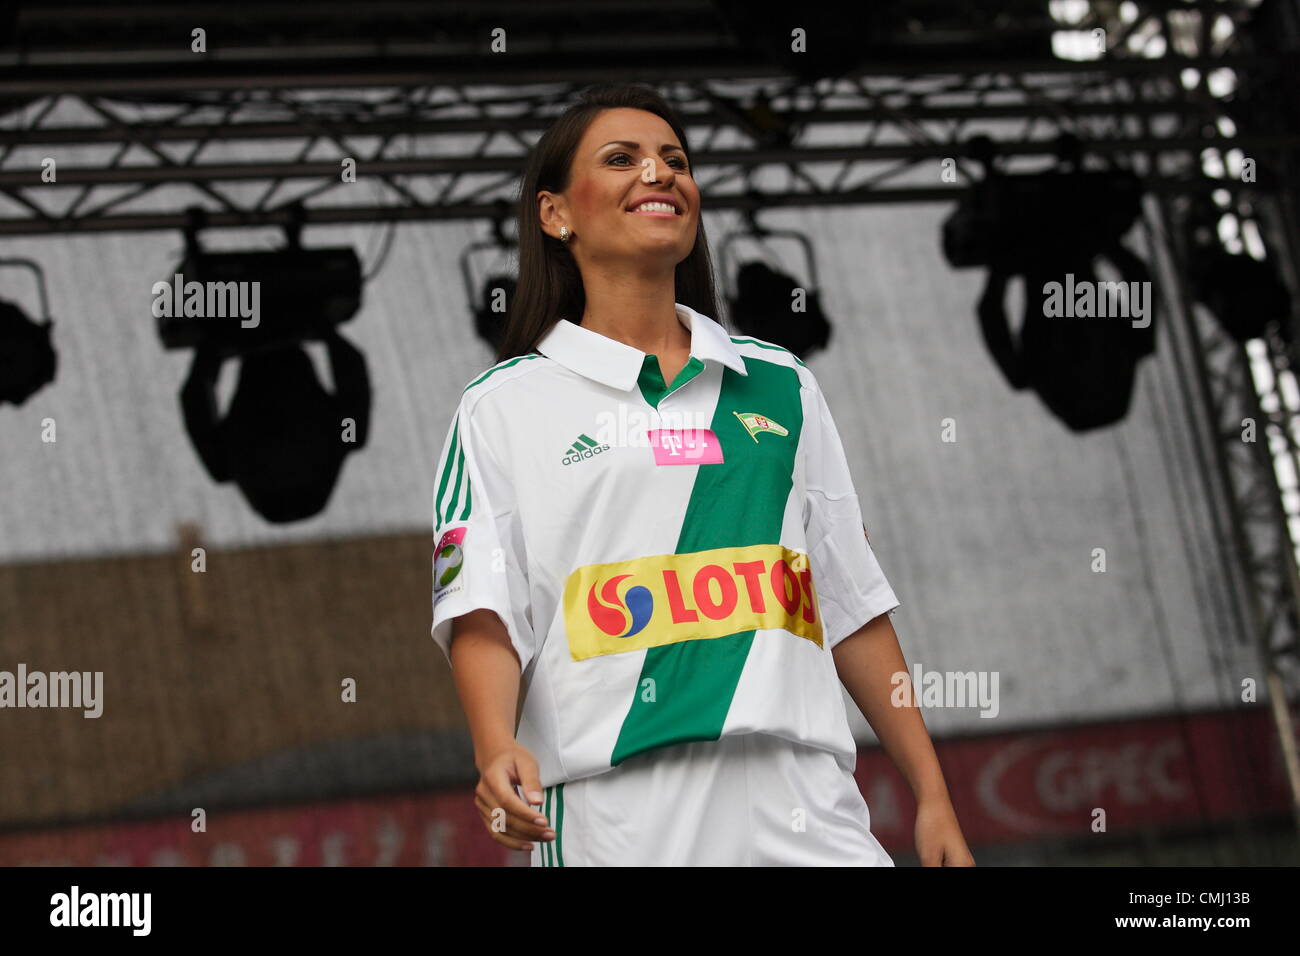 13th Aug 2012. Gdansk, Poland 13.08.2012 Lechia Gdansk - Polish football extraleague team presentation before the 2012/2013 seazon. Model presents new costumes for players. Stock Photo